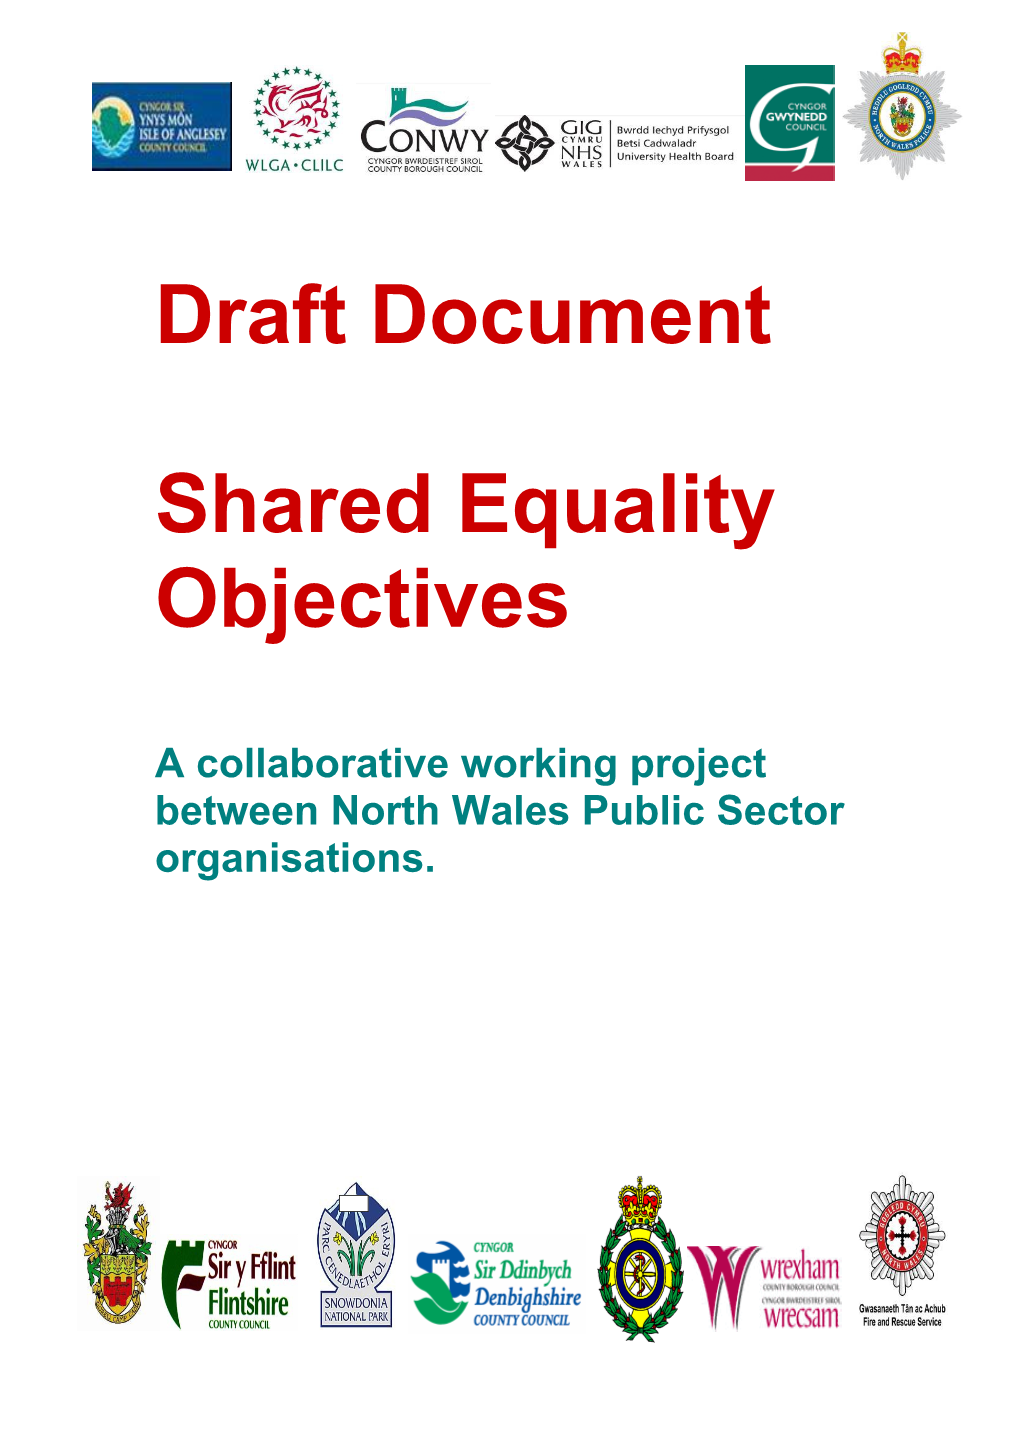 Shared Equality Objectives